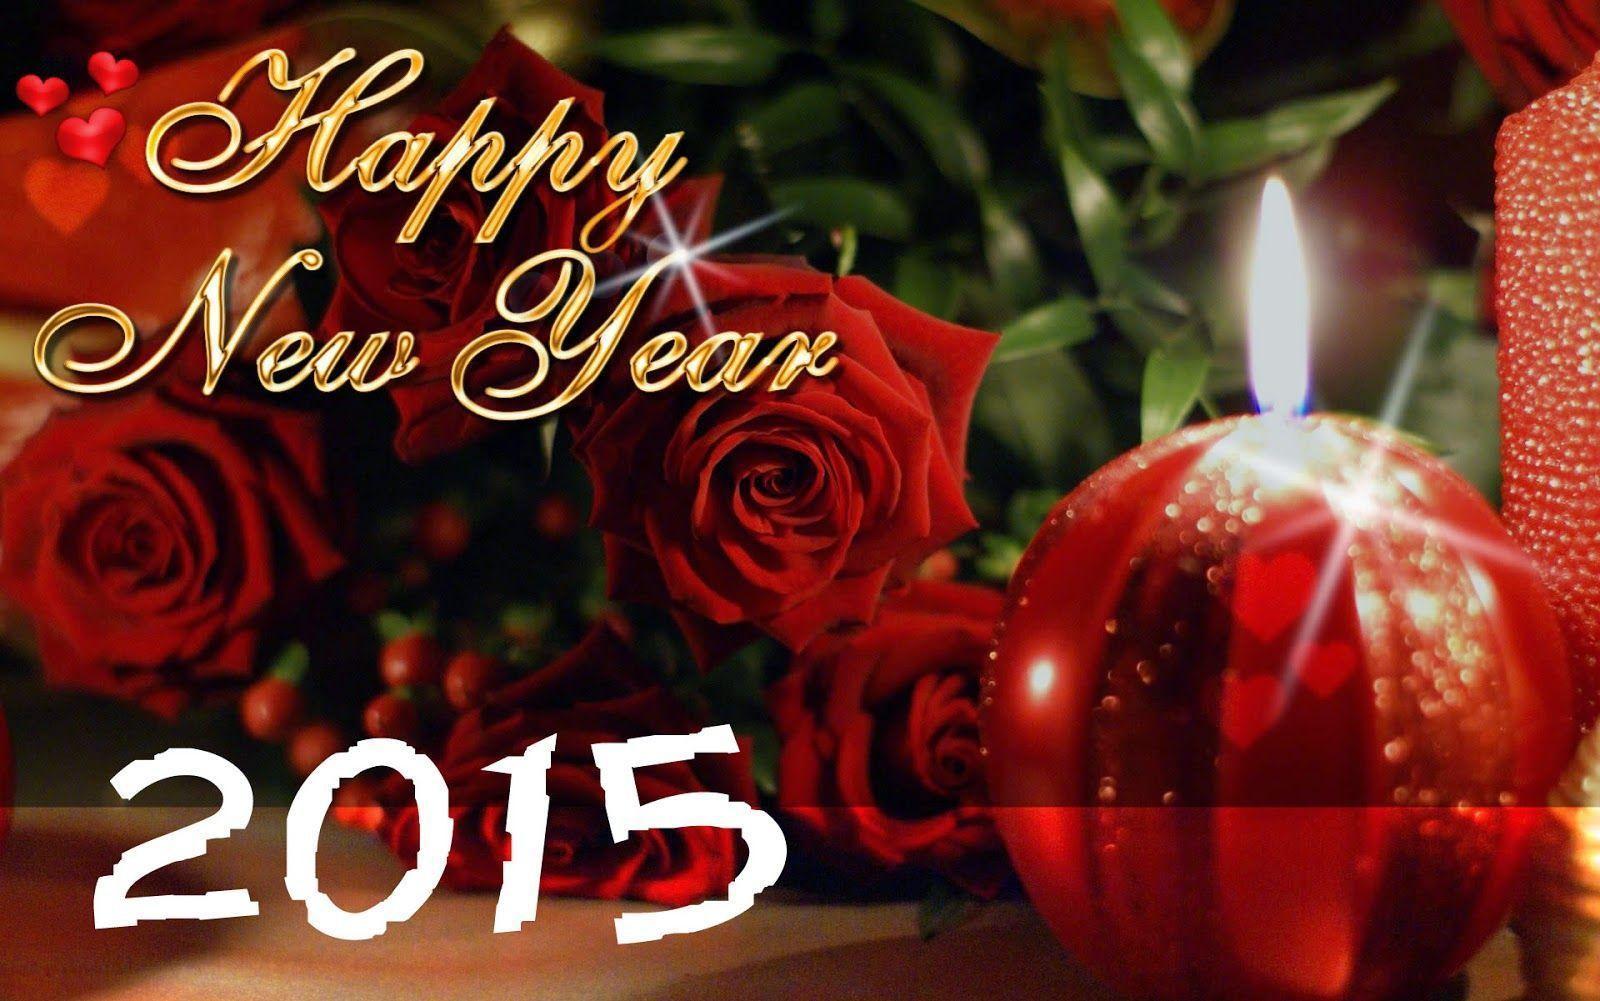 Happy New Year Quotes 2015 And Picture